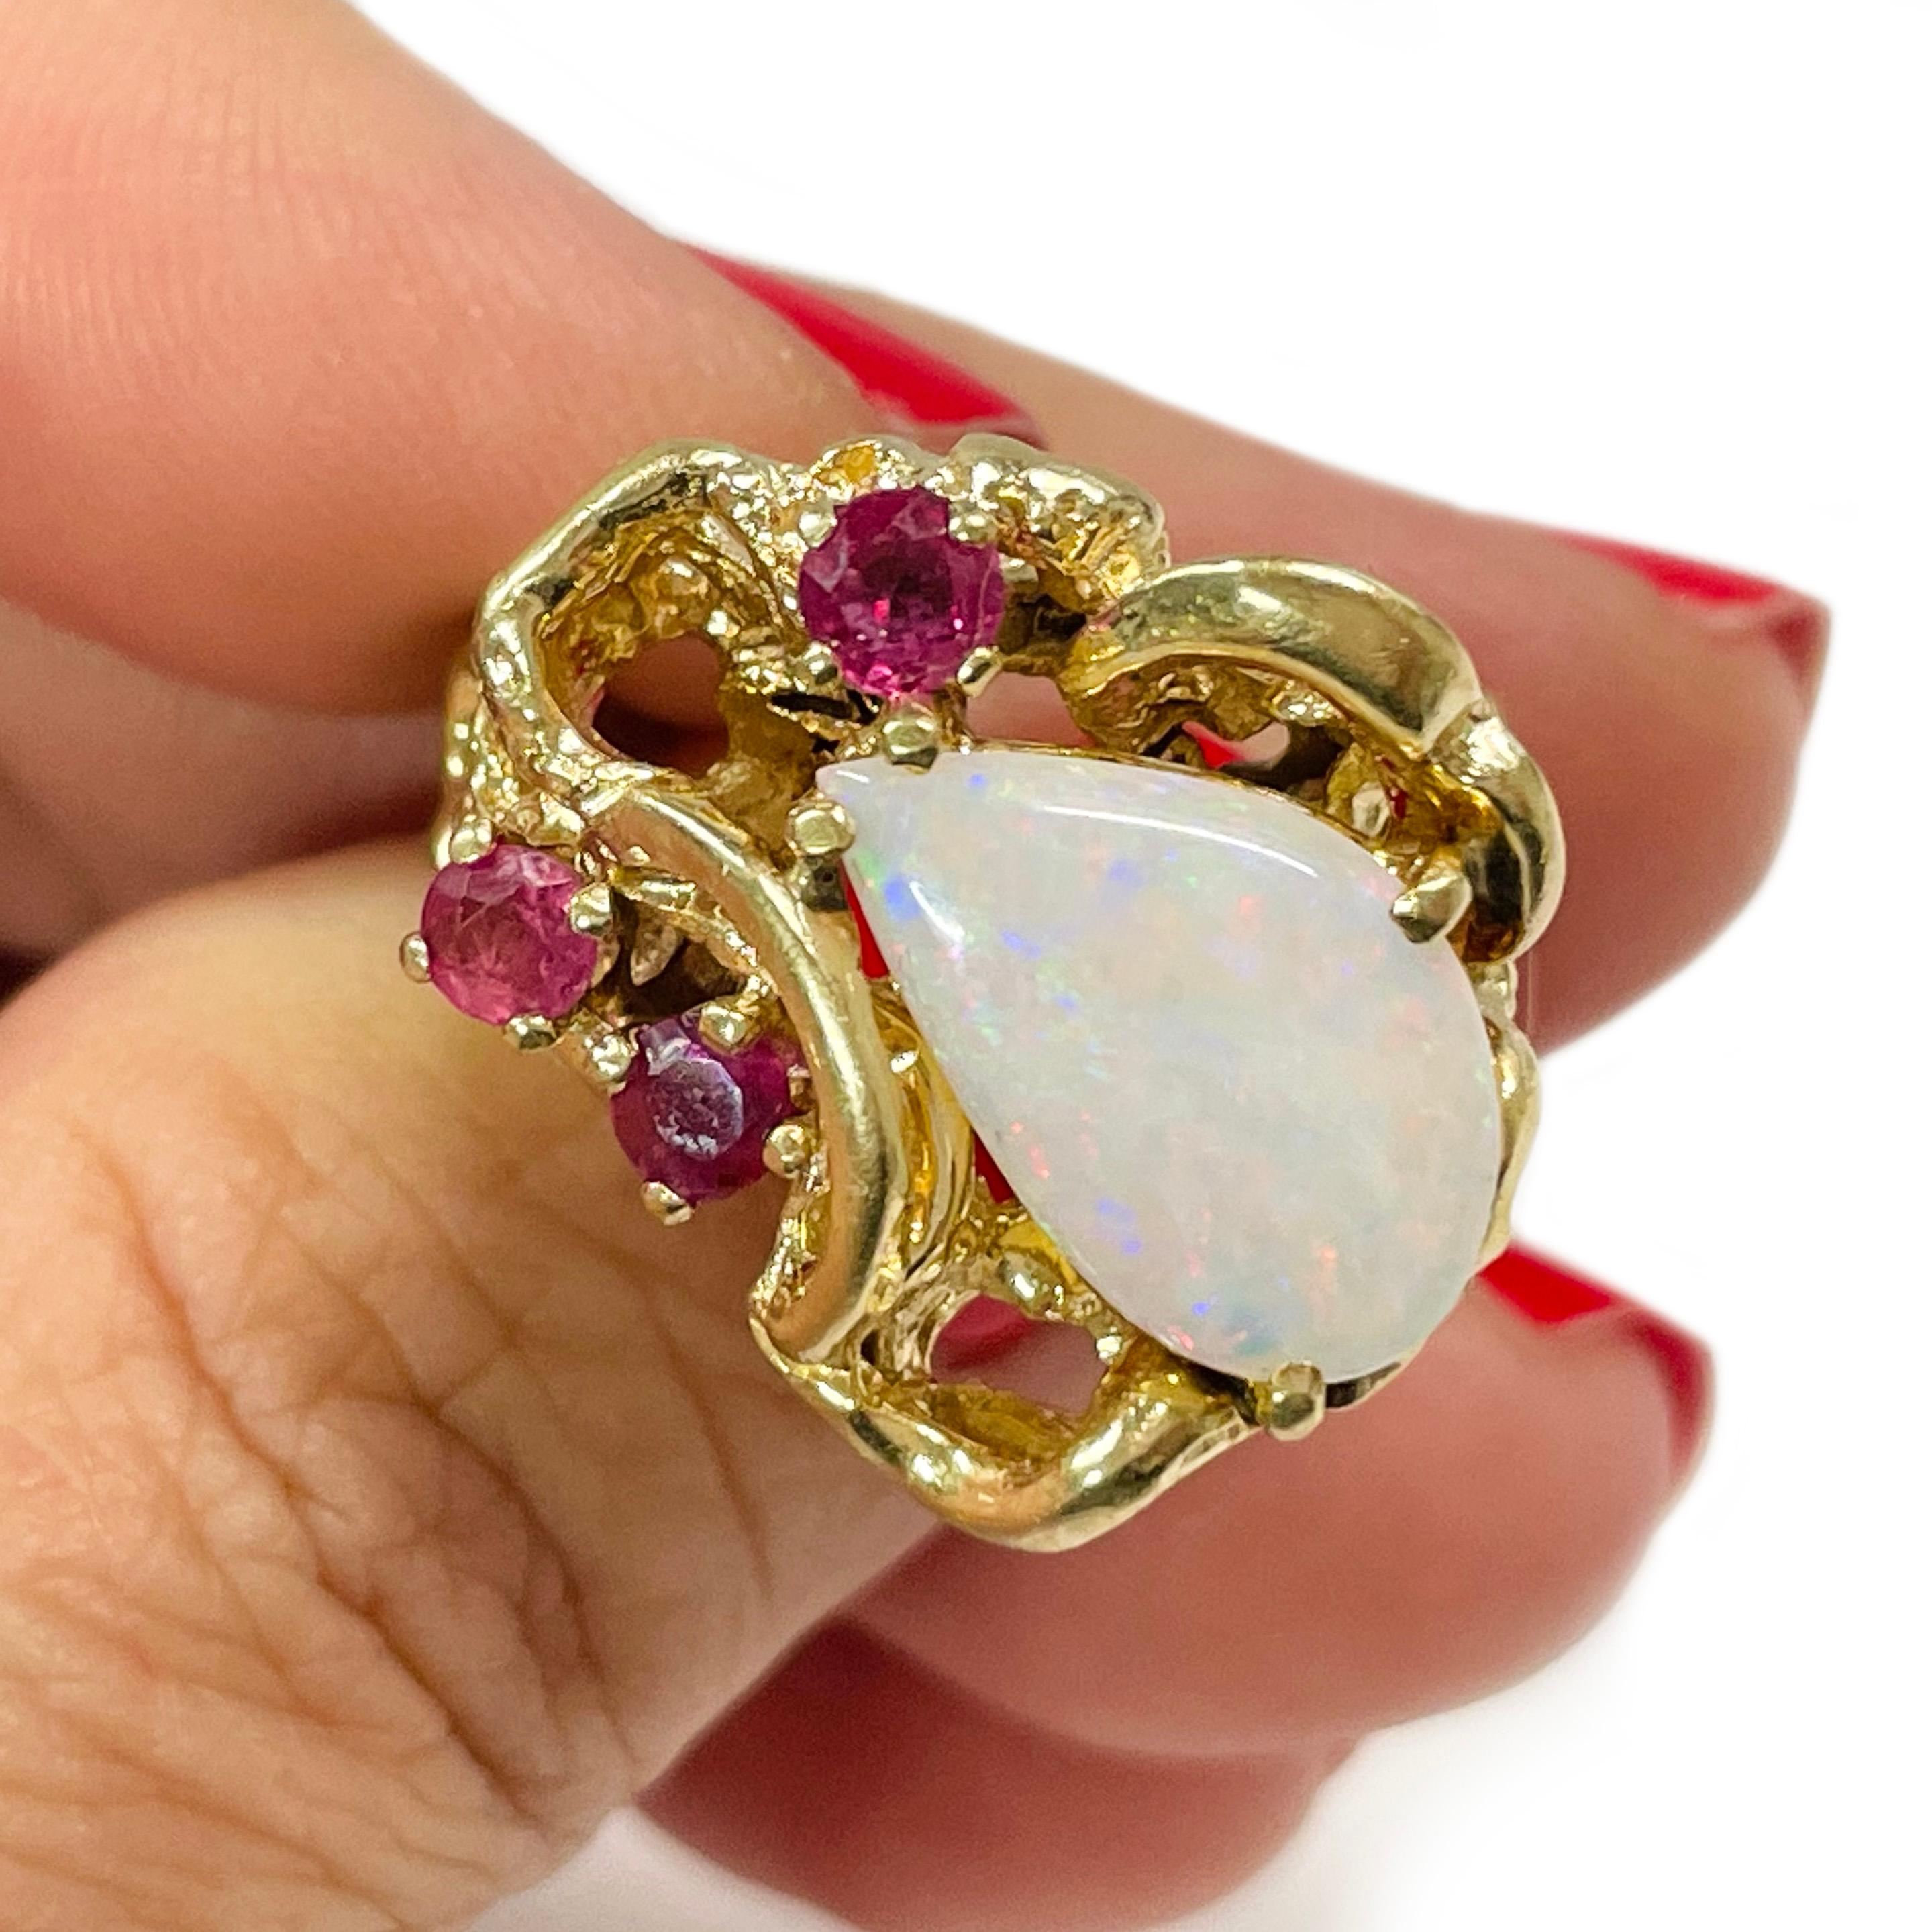 14 Karat Yellow Gold Opal Ruby Ring. The ring features a fancy opal measuring 13.2 x 8.5mm. The opal is prong-set with gold swirl and nugget asymmetrical designs. Prong-set on one side of the opal are 3 round rubies. The rubies measure 3.5mm and